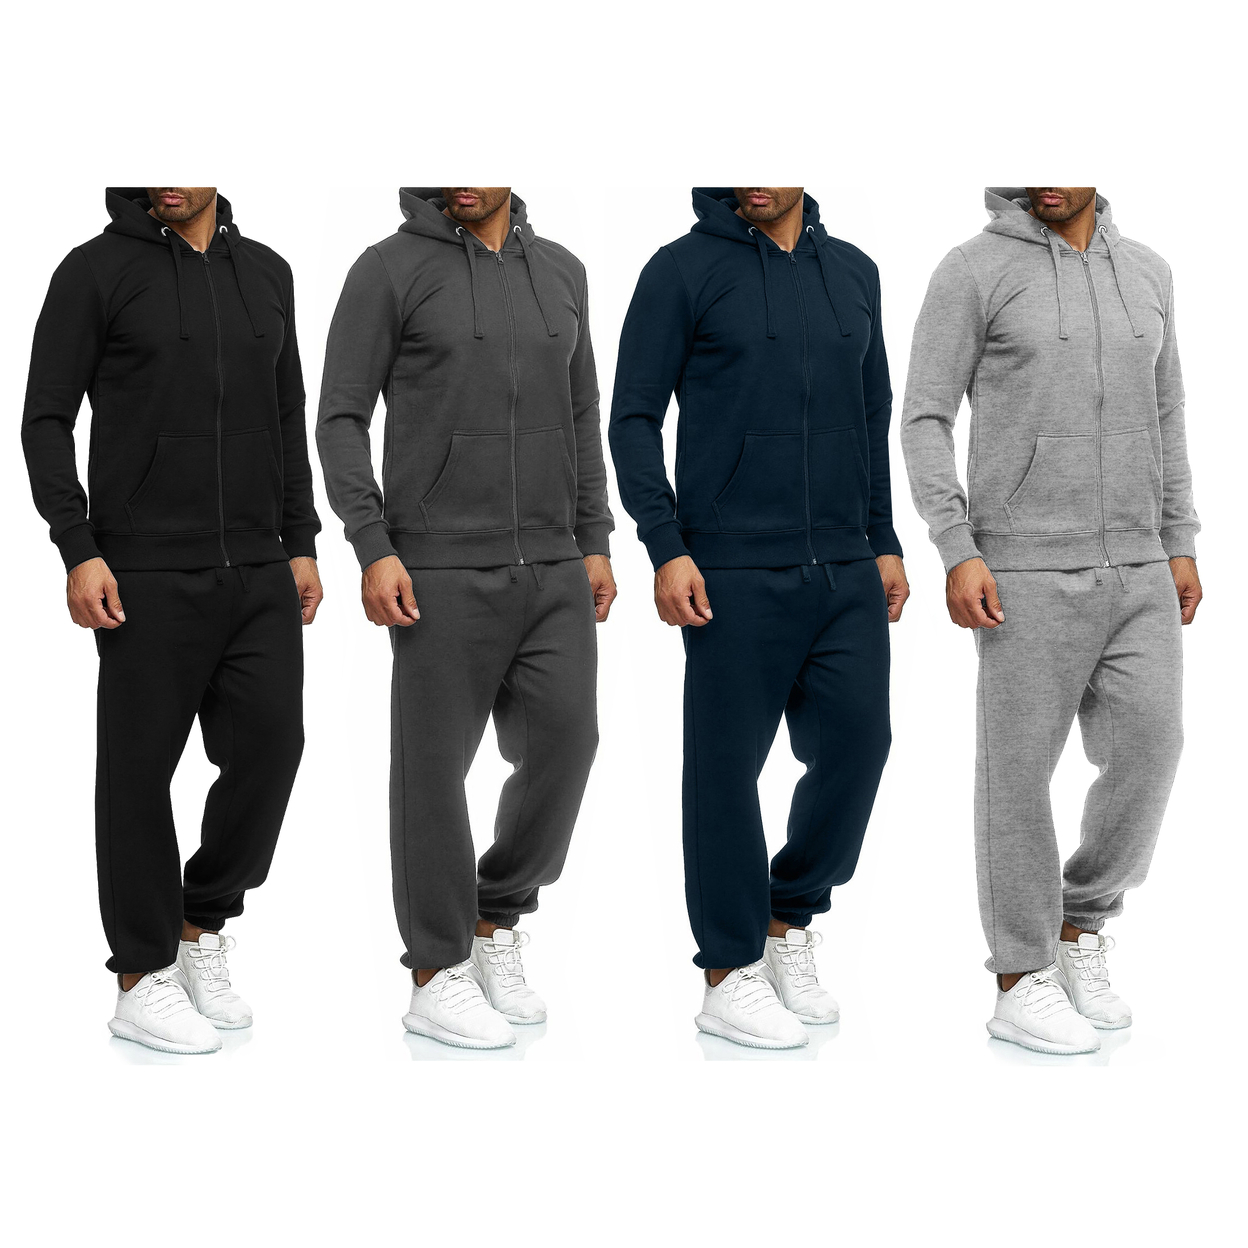 Multi-Pack: Men's Casual Big & Tall Athletic Active Winter Warm Fleece Lined Full Zip Tracksuit Jogger Set - Charcoal, 1-pack, Small